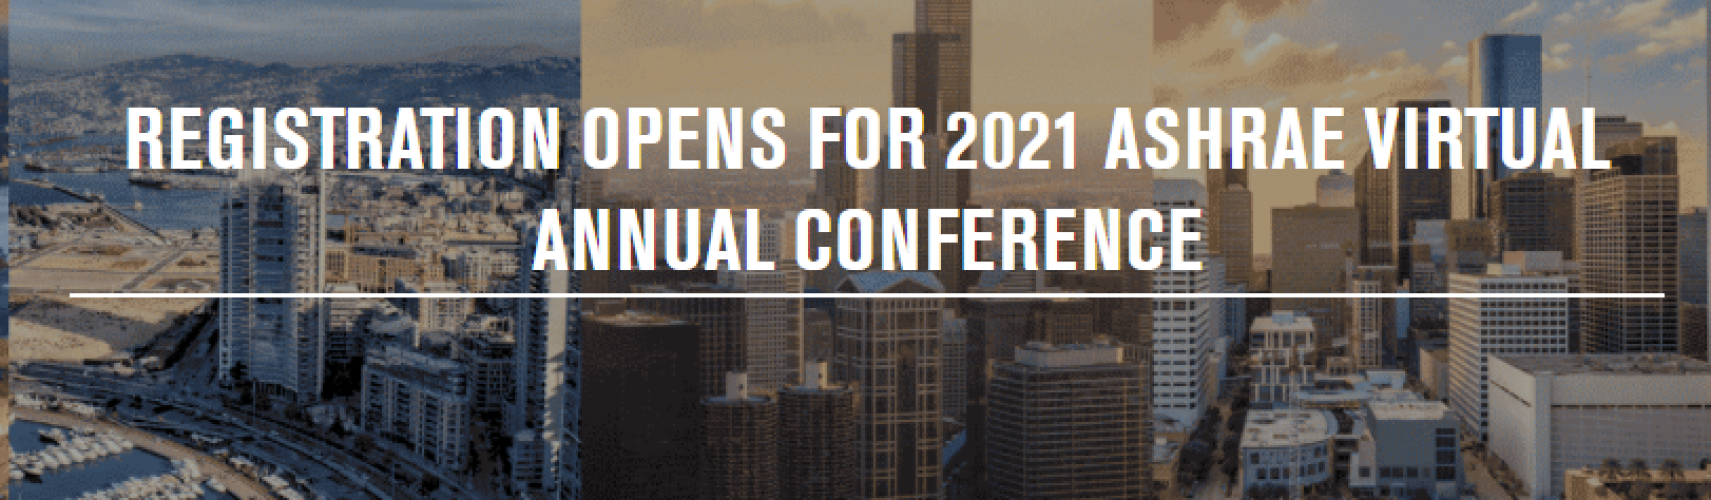 Registration Opens For 2021 ASHRAE Virtual Annual Conference